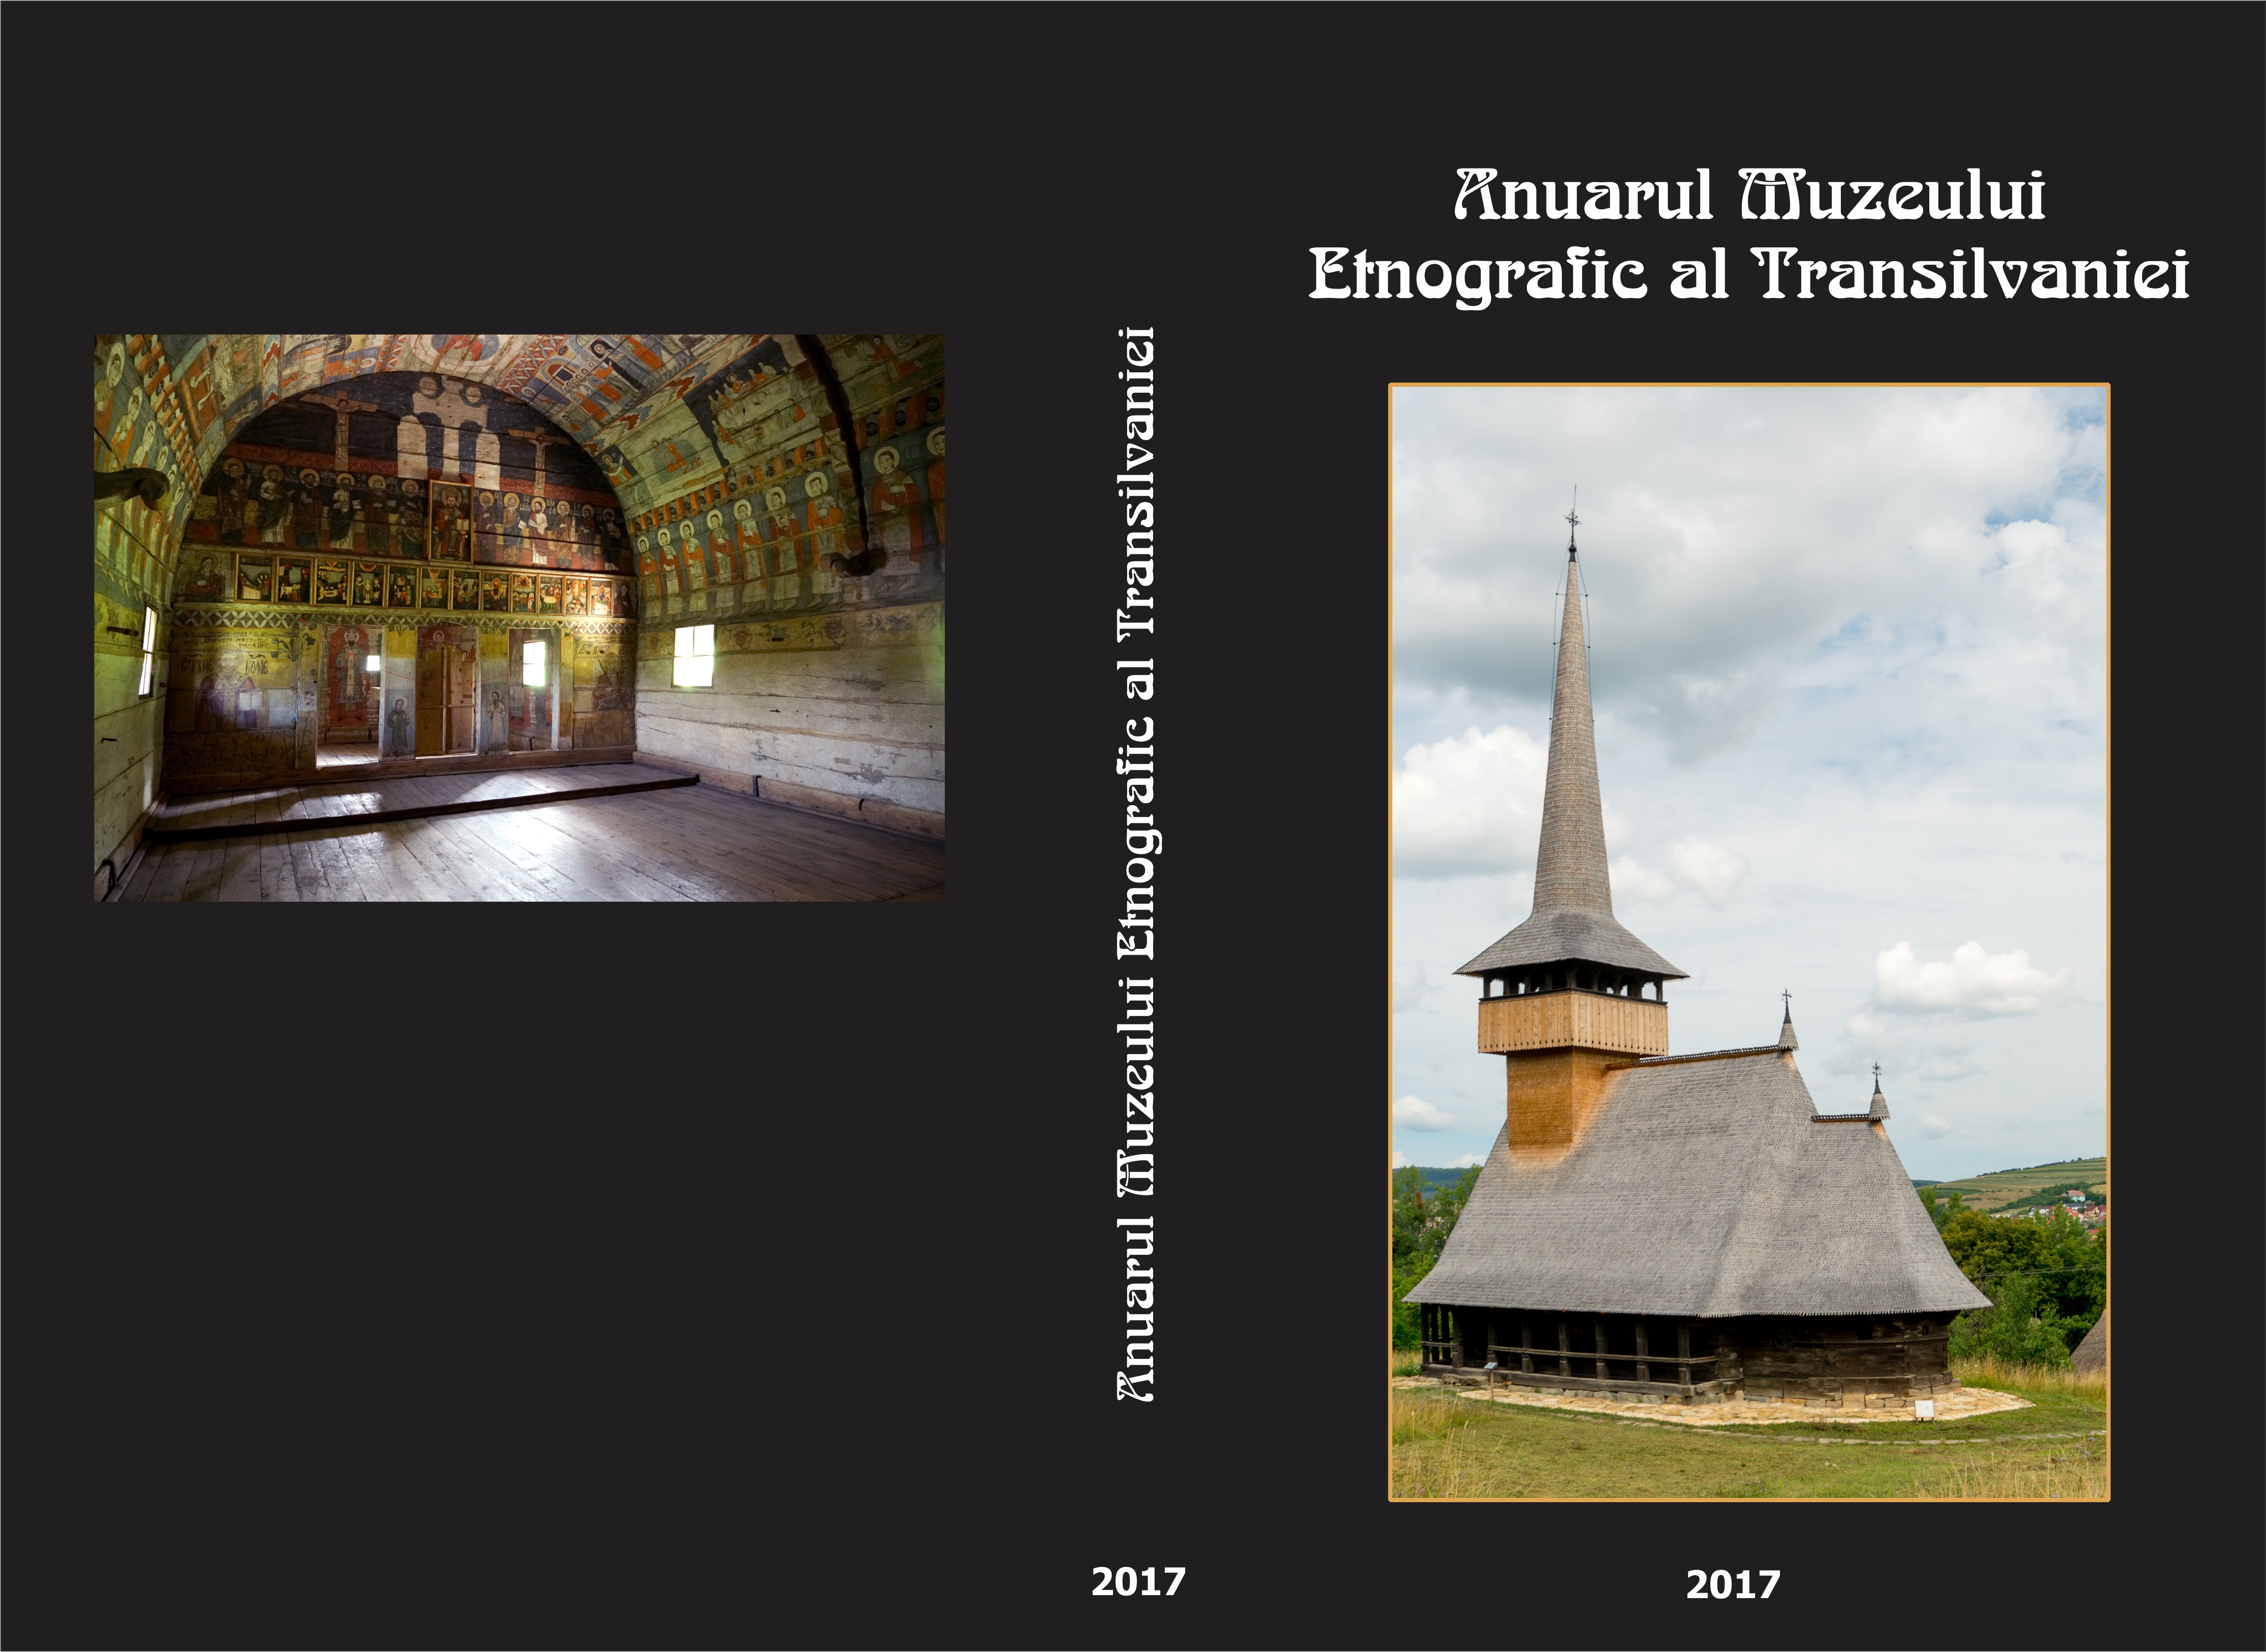 New methods and Training Techniques for Persons with Visual Disability in Specific Activities Carried Out within the Transylvanian Museum of Ethnography Cover Image